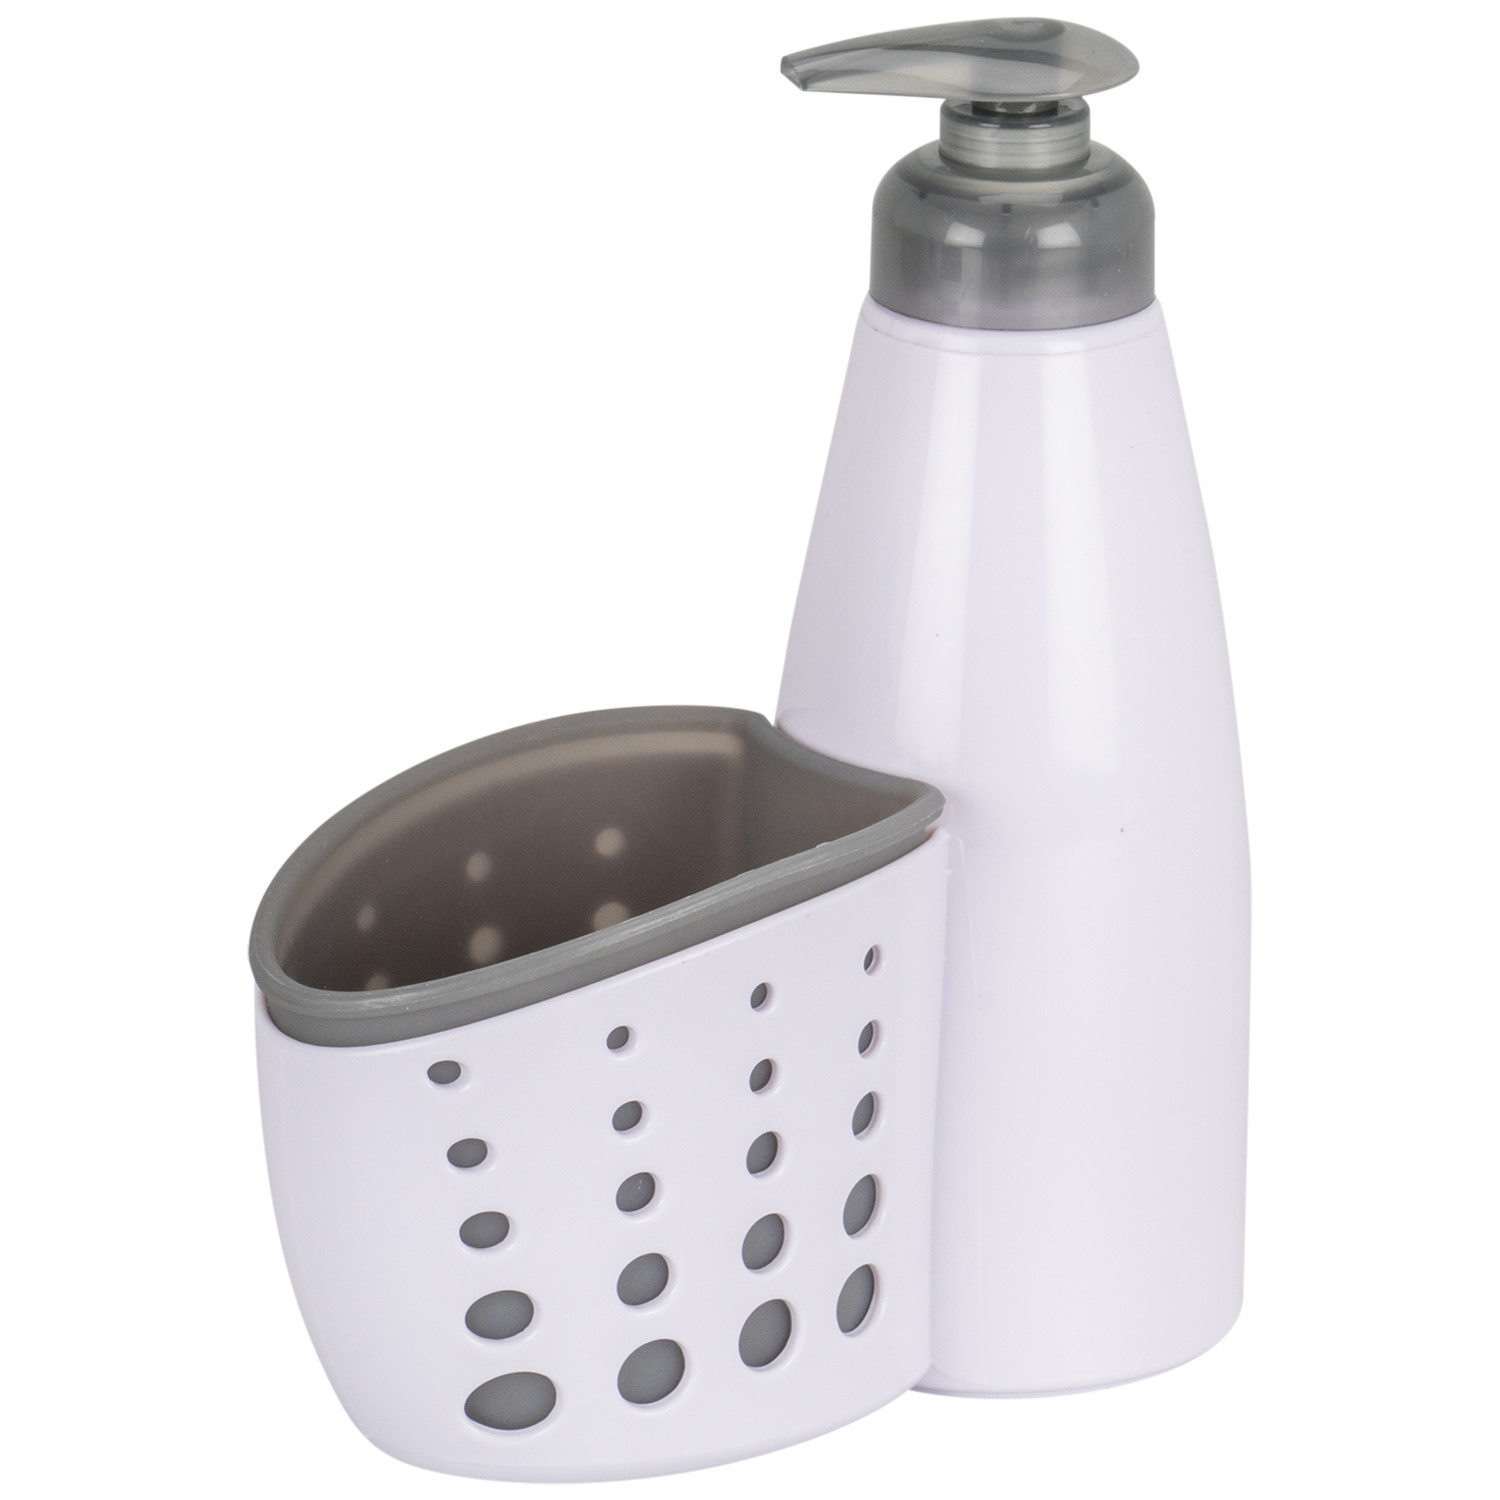 Soap Bottle and Caddy - White Image